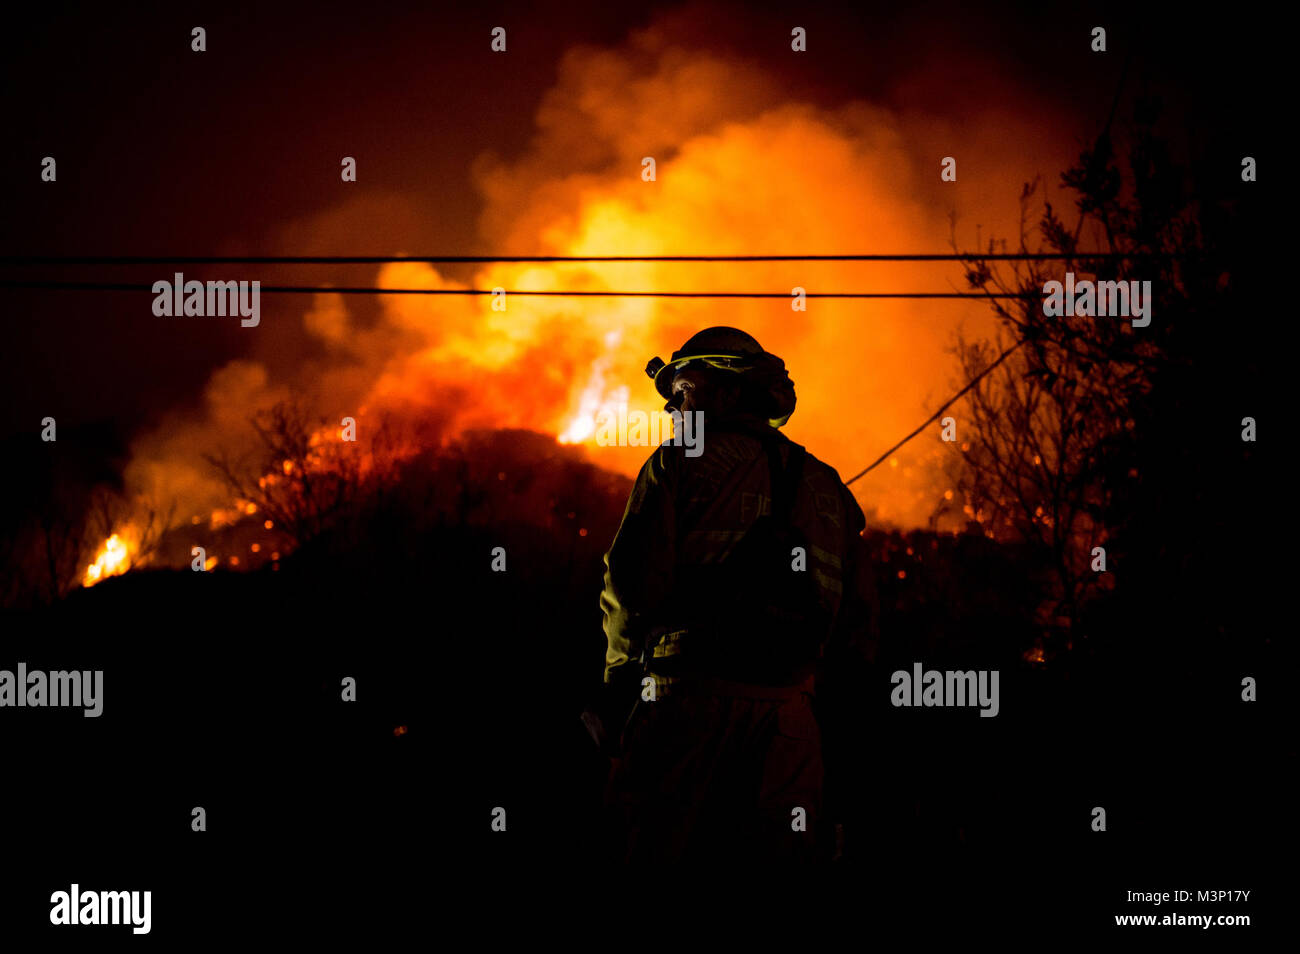 Chino Valley firefighters watch the oncoming flames of the Thomas Fire from the yard of a home in Montecito, California, Dec. 12, 2017. C-130Js of the 146th Airlift Wing at Channel Islands Air National Guard Base in Port Hueneme, carried the Modular Airborne Fire Fighting System and dropped fire suppression chemicals onto the fire's path to slow its advance in support of firefighters on the ground. (U.S. Air Force photo by J.M. Eddins Jr.) 171212-F-LW859-835 by AirmanMagazine Stock Photo